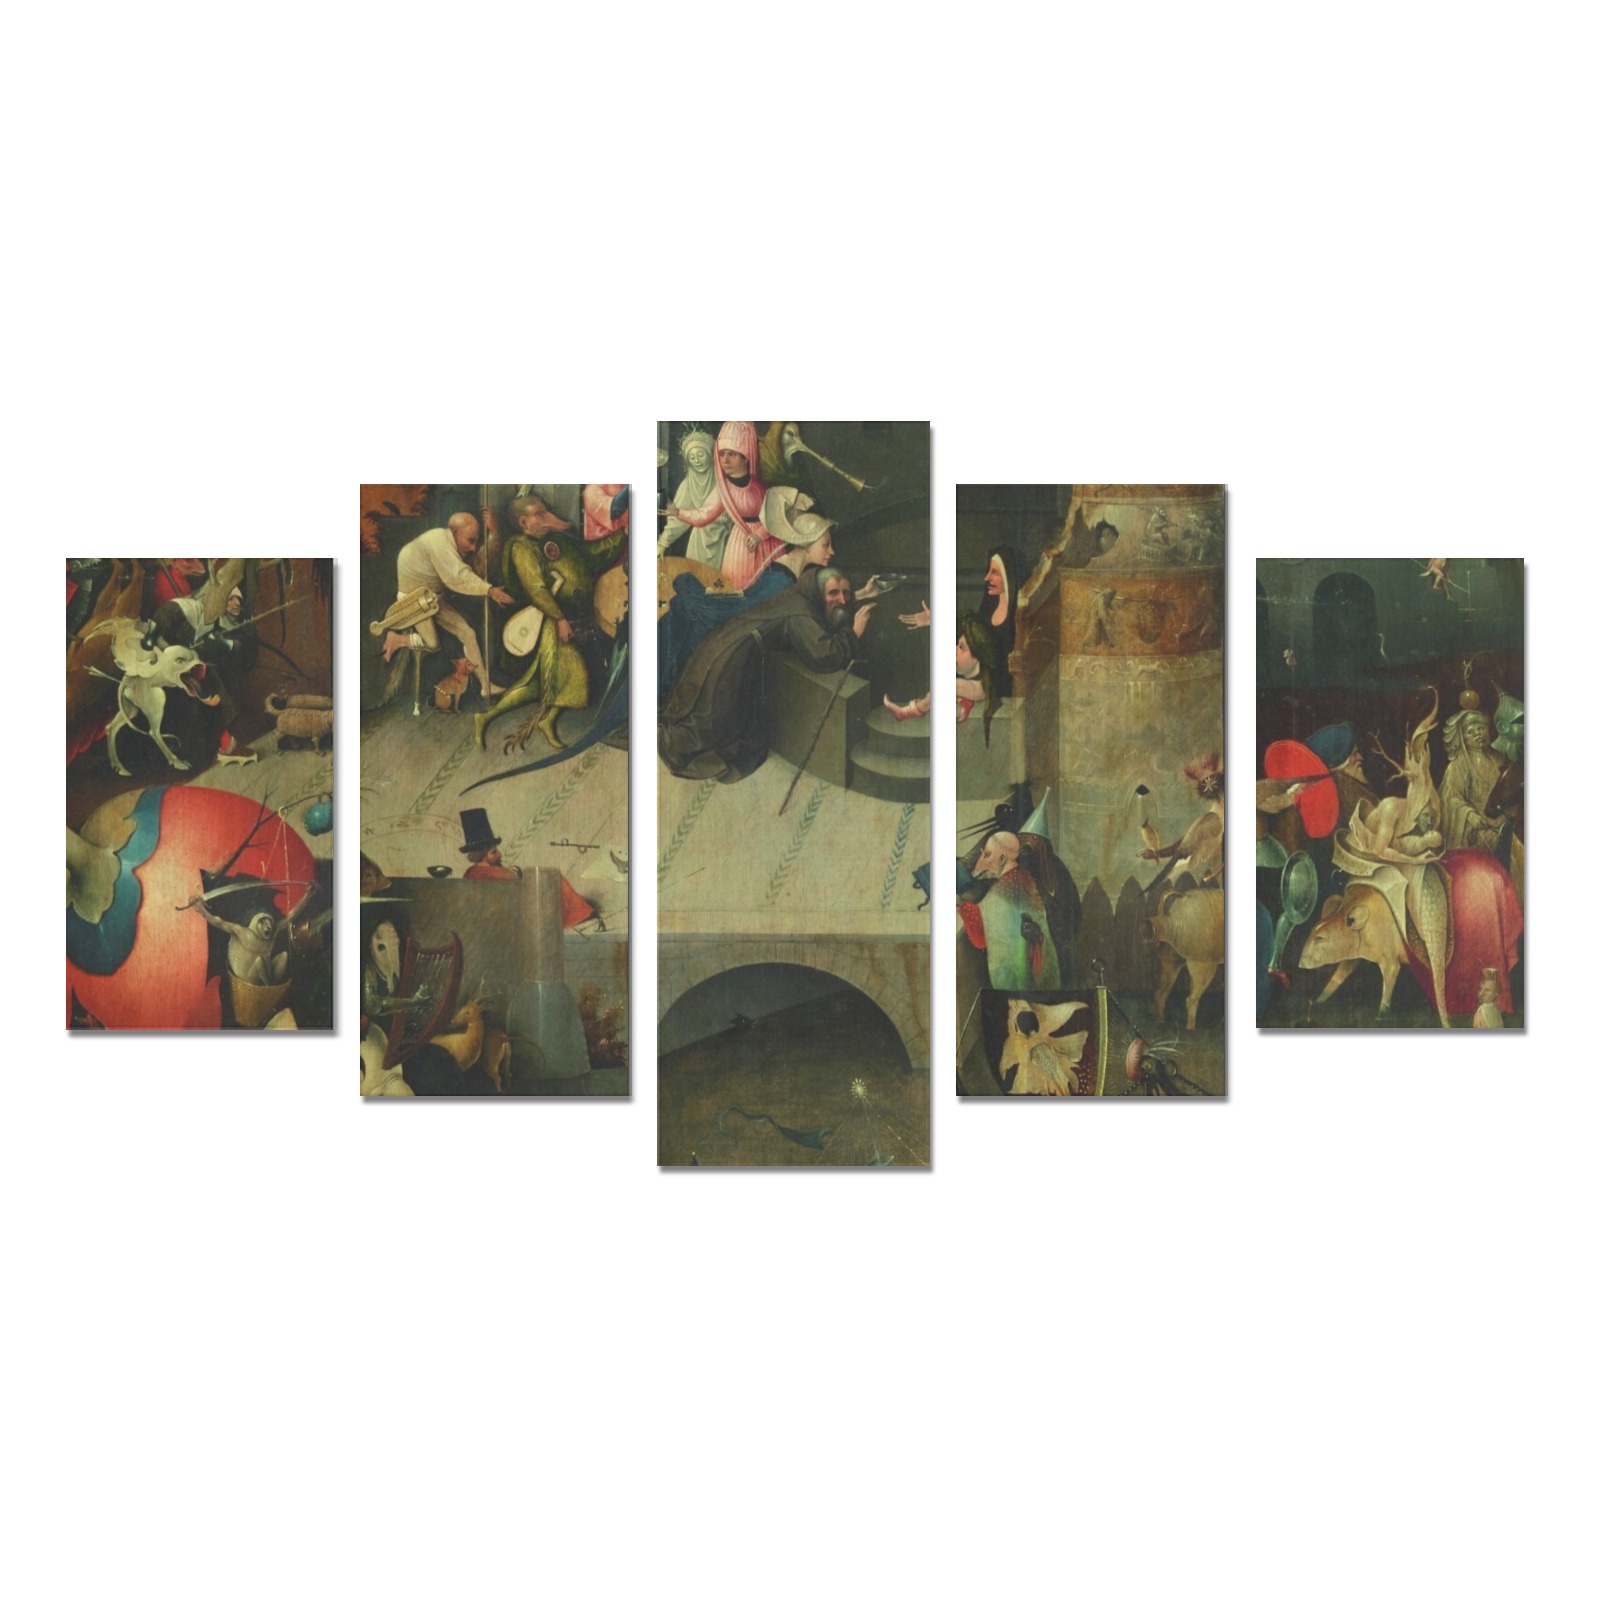 Hieronymus Bosch-The Temptation of St Anthony Canvas Print Sets A (No Frame)